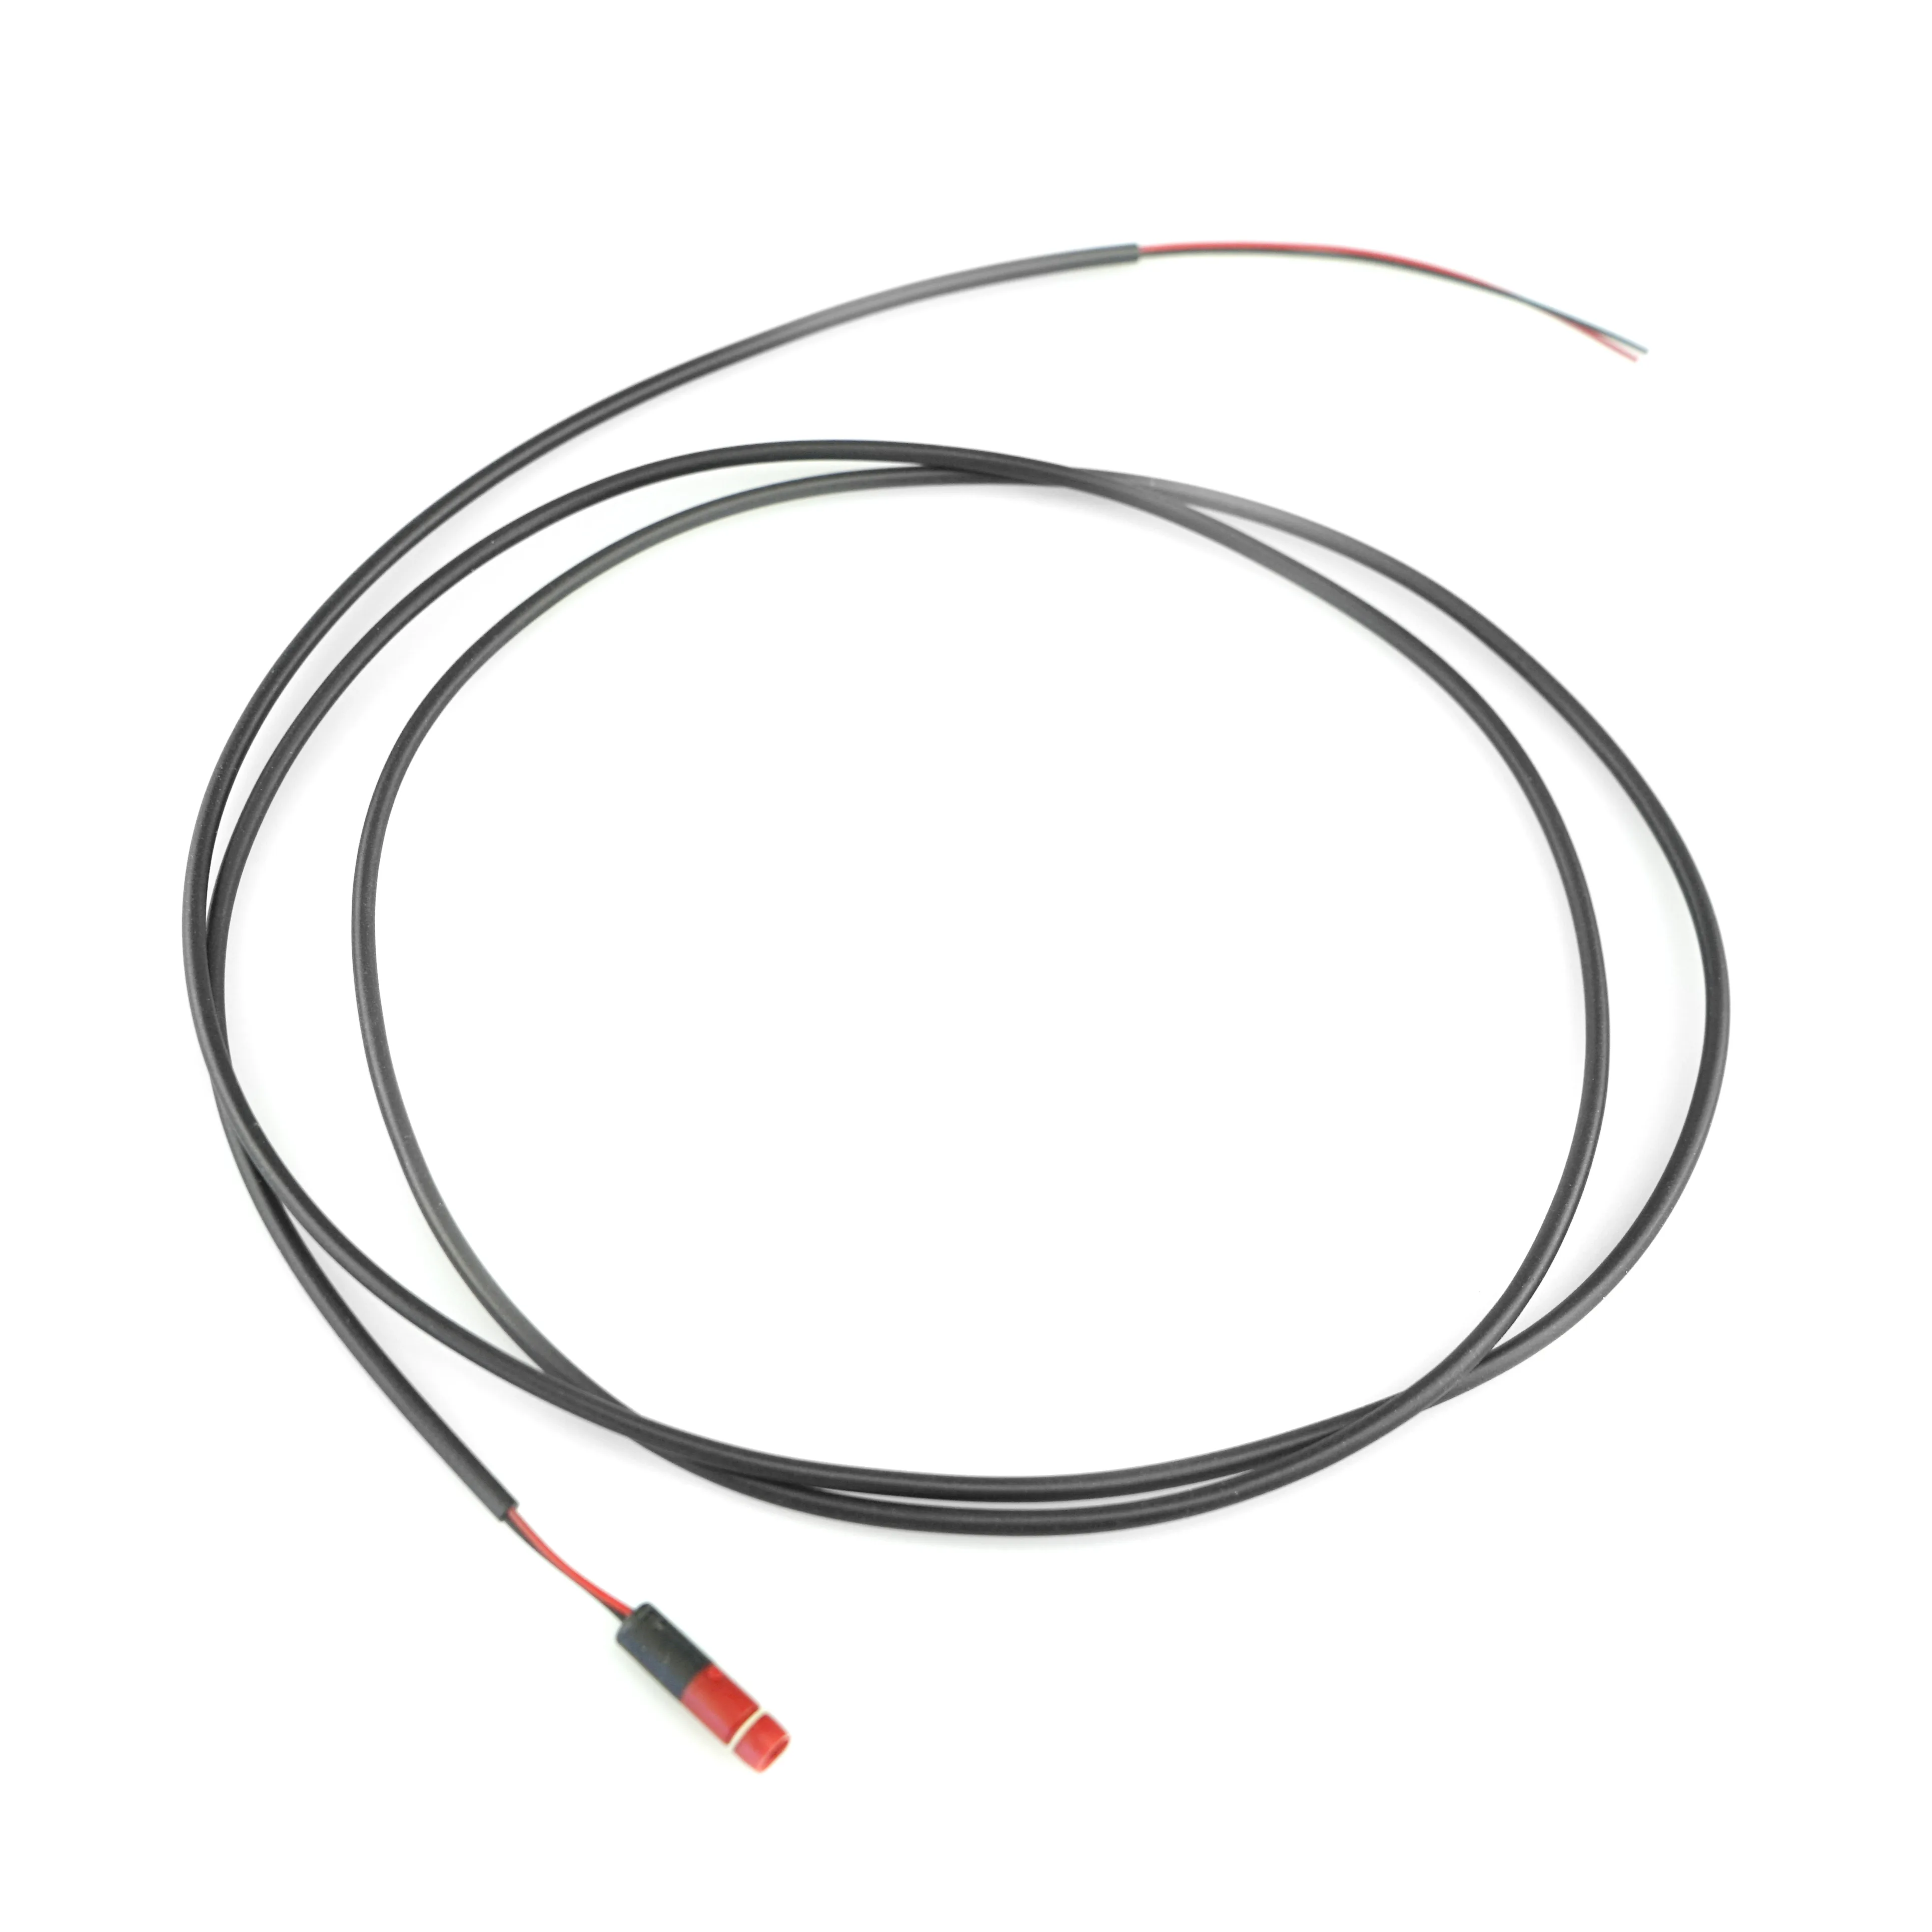 FIT light cable with Brose plug for rear light without plug